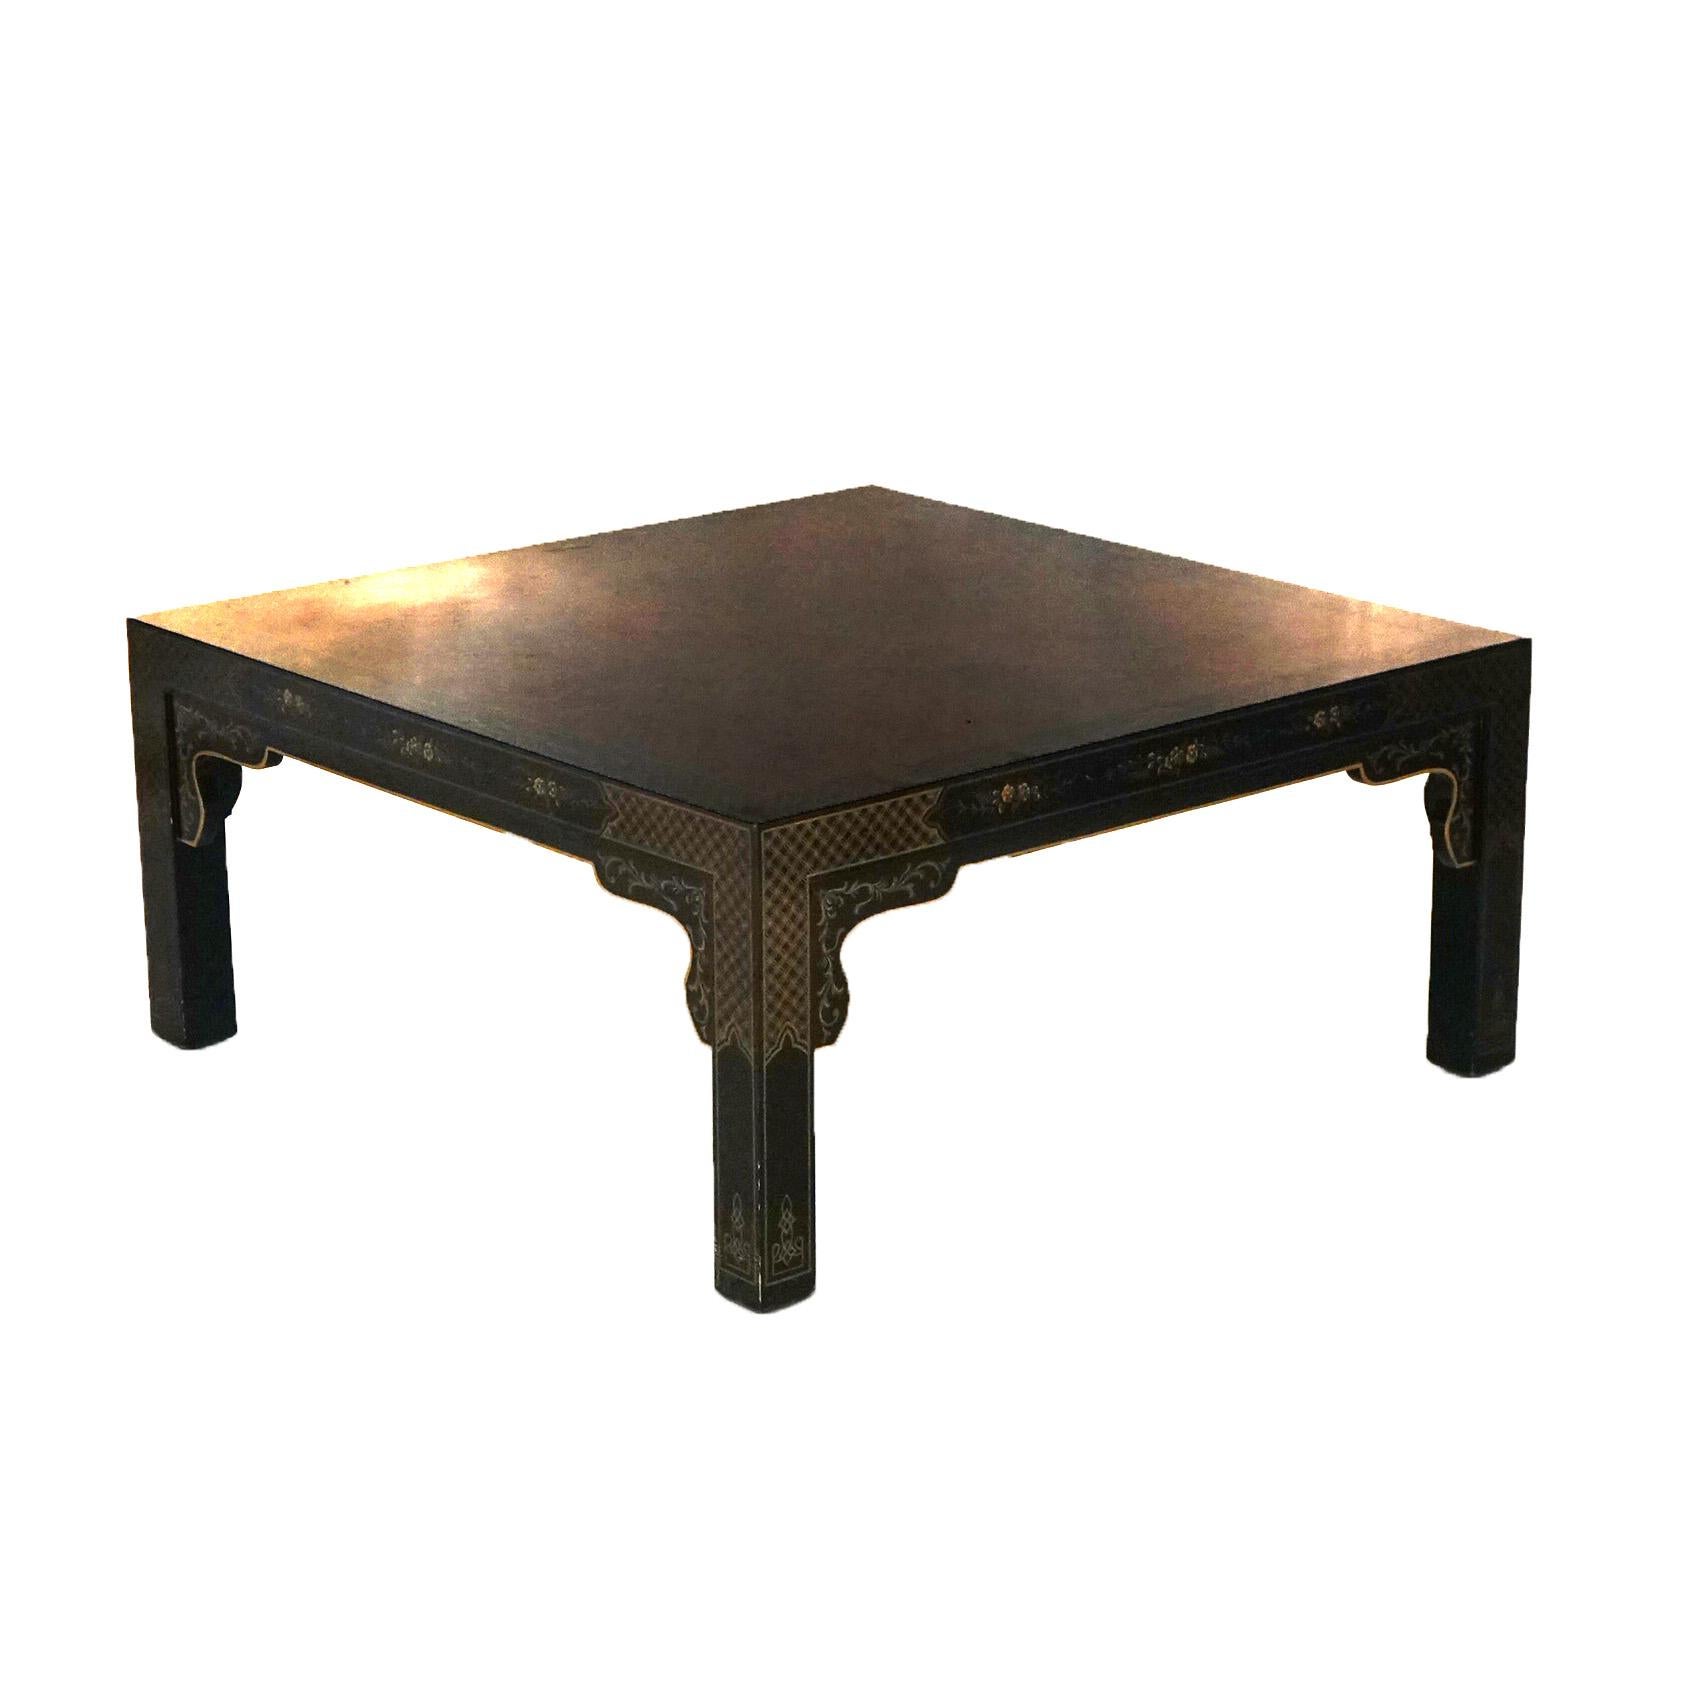  Drexel Heritage Mahogany And Ebonized Chinoiserie Decorated Low Table C1950 For Sale 7